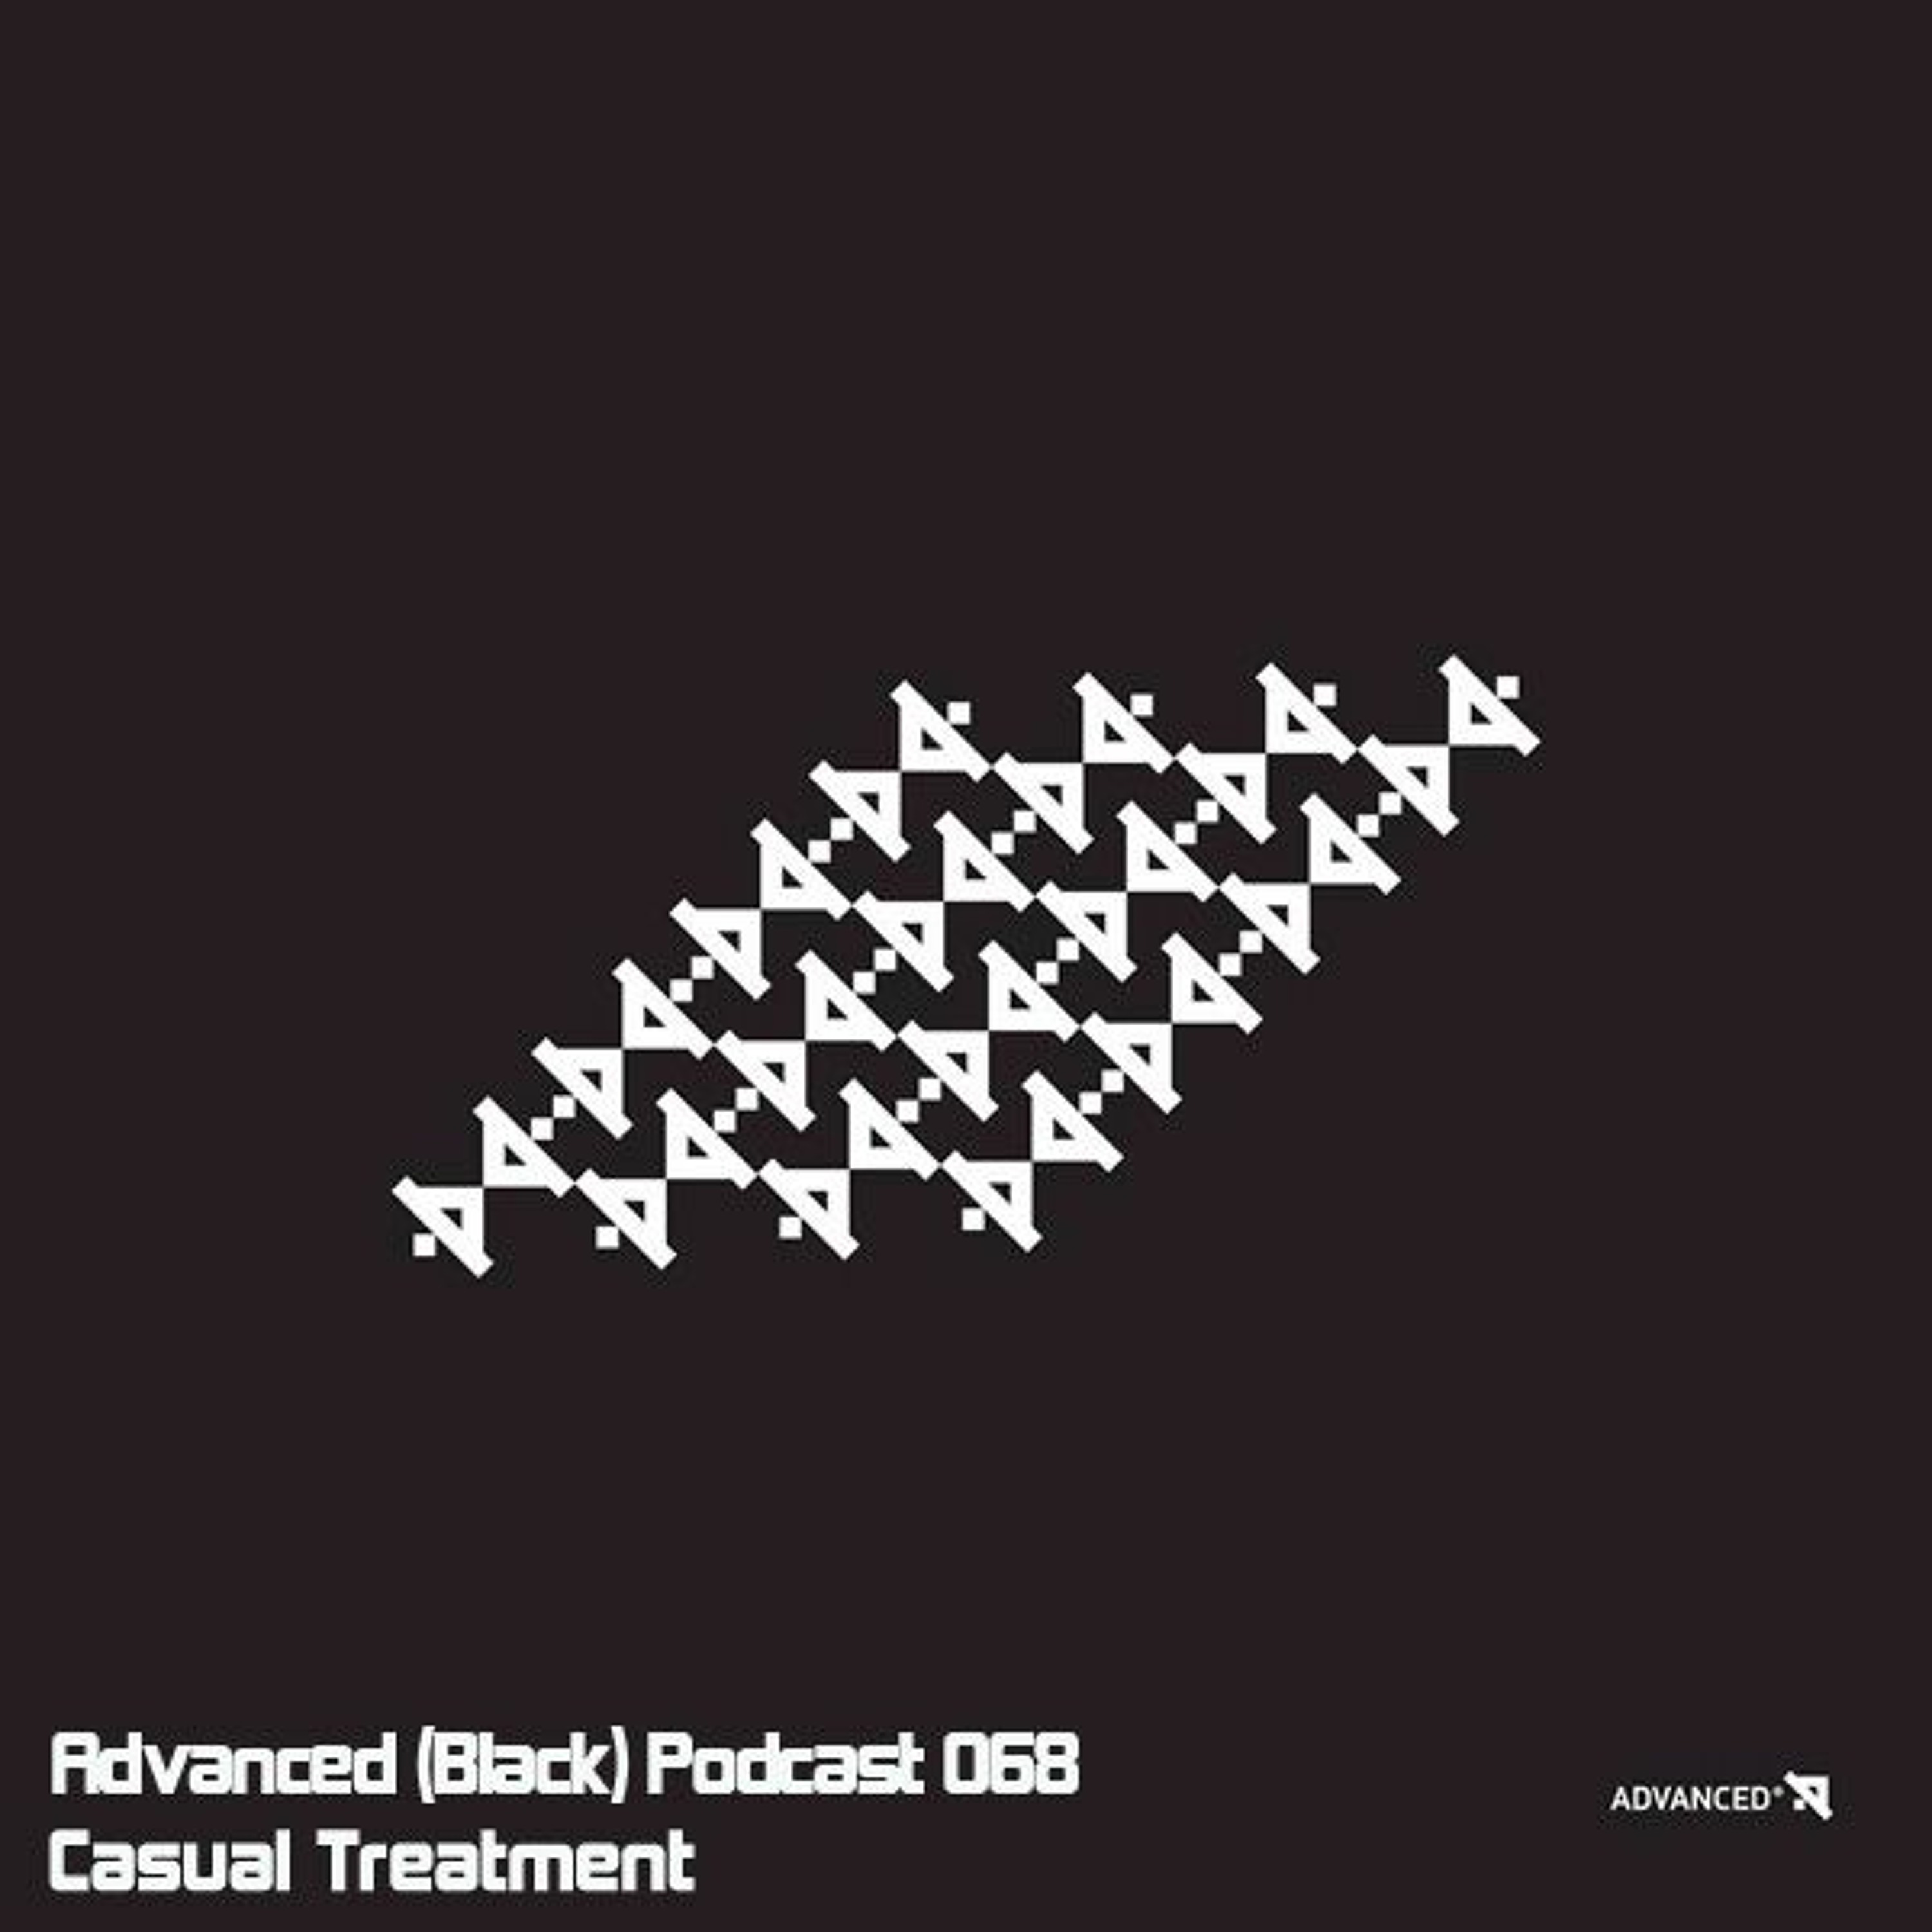 Advanced (Black) Podcast 068 with Casual Treatment